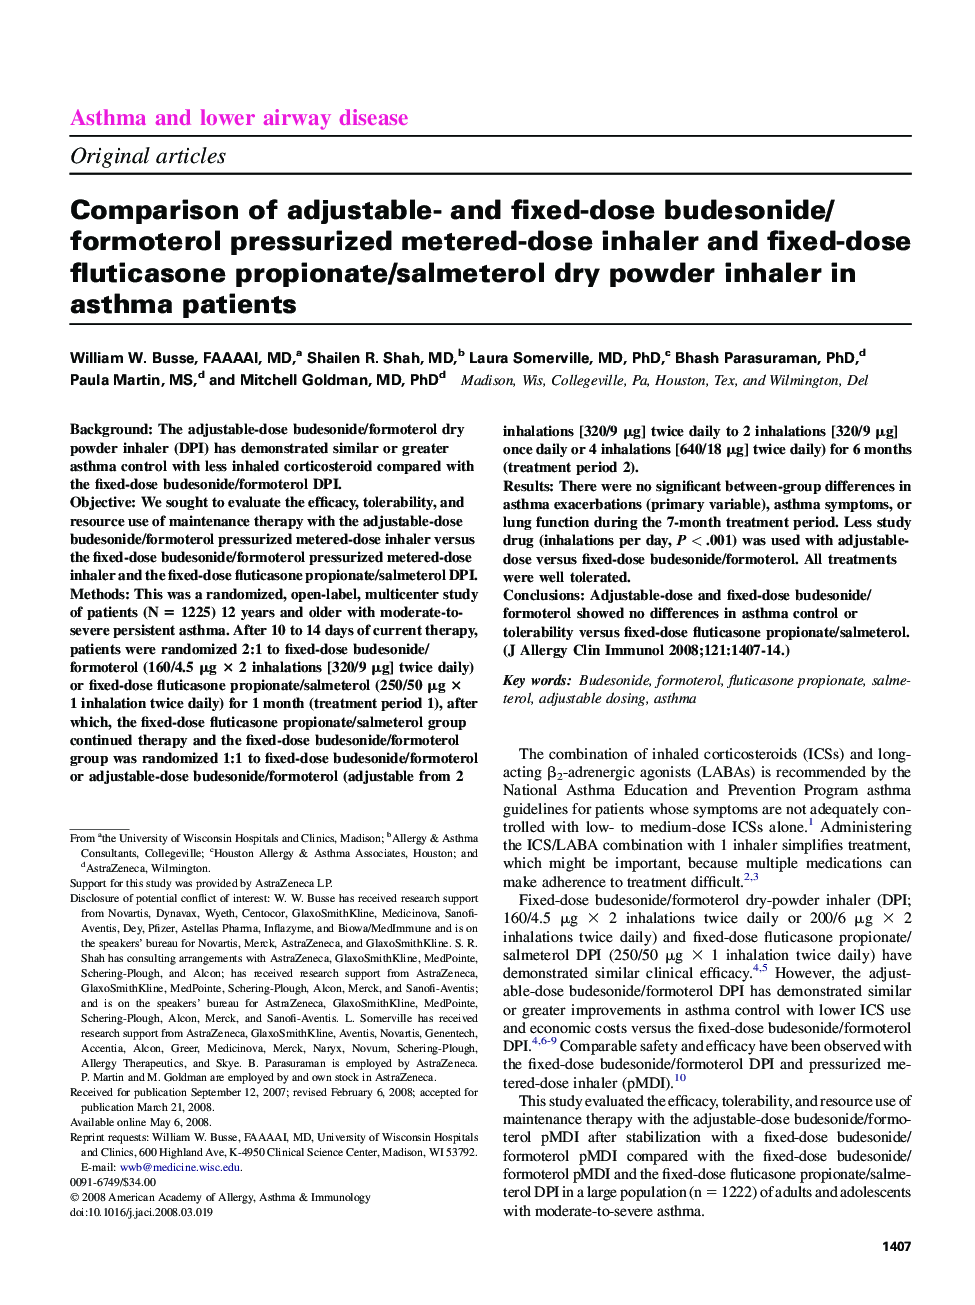 Comparison of adjustable- and fixed-dose budesonide/formoterol pressurized metered-dose inhaler and fixed-dose fluticasone propionate/salmeterol dry powder inhaler in asthma patients